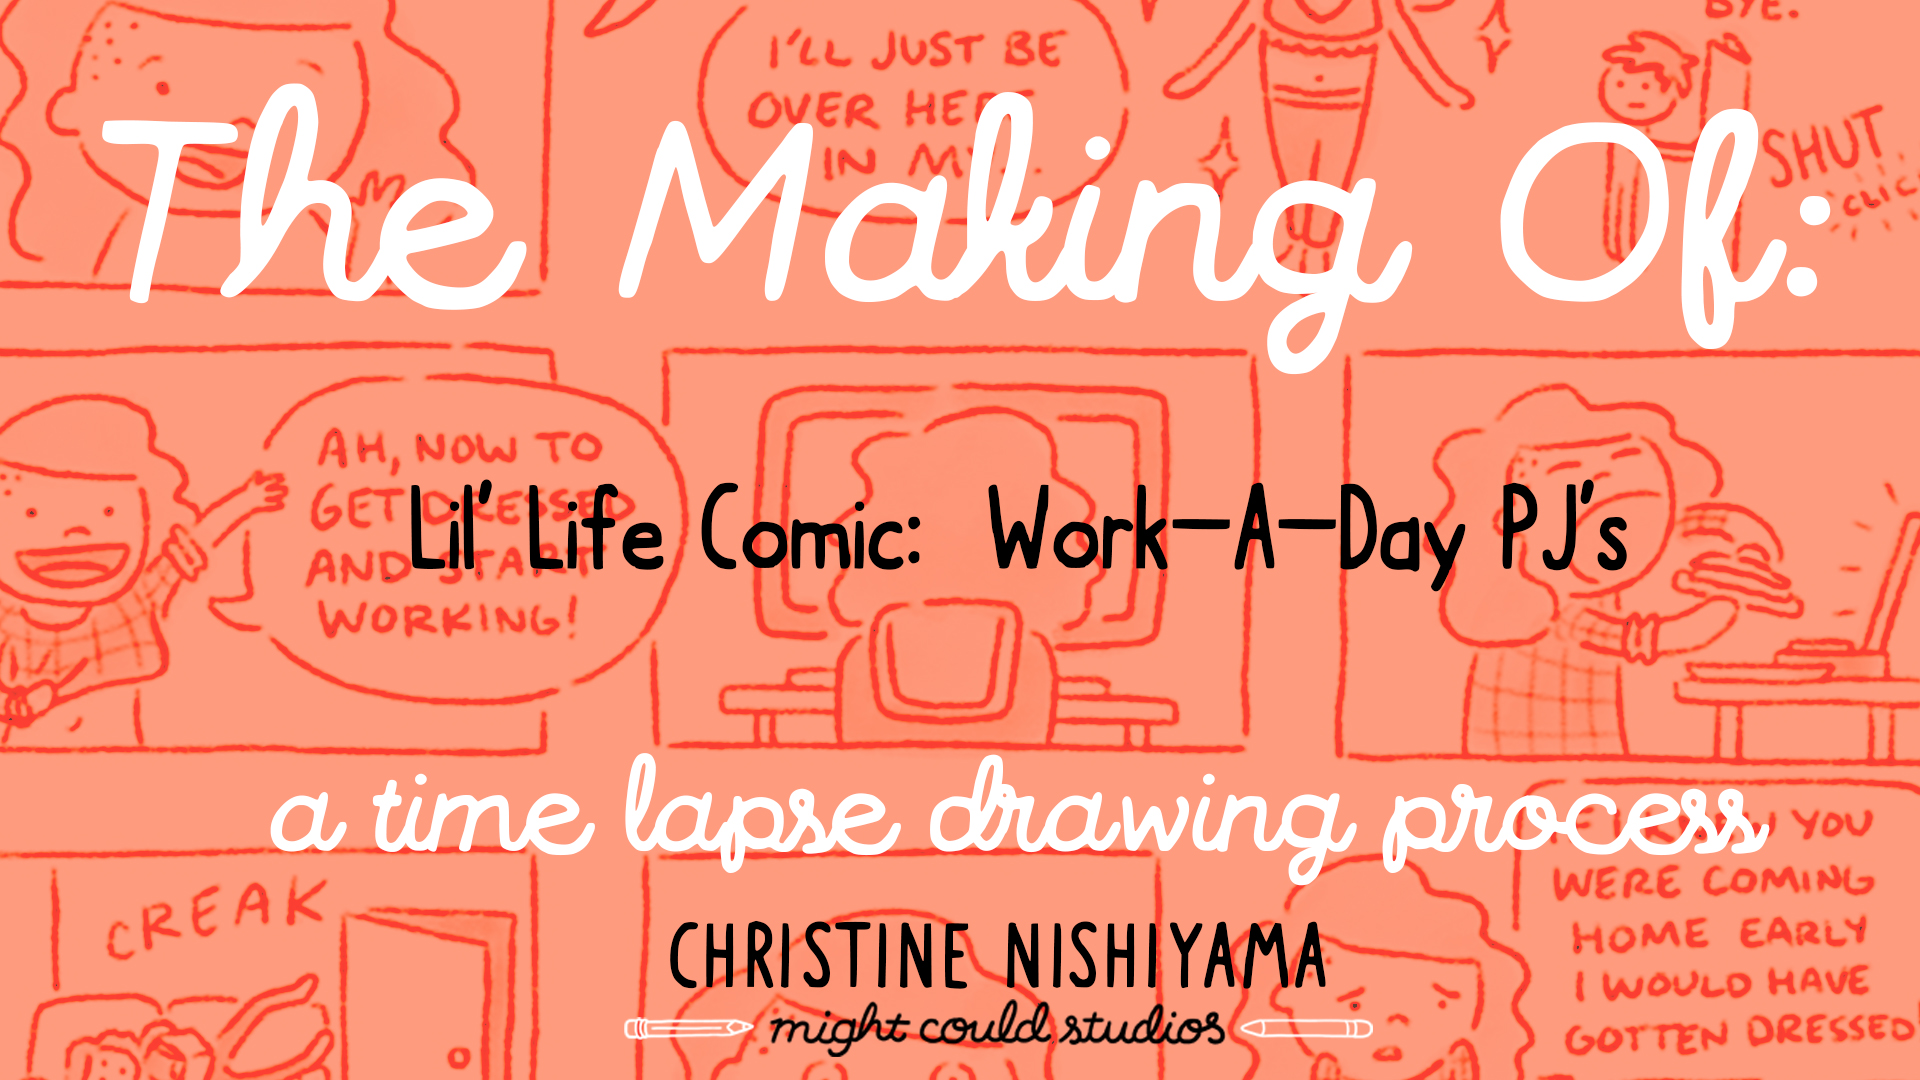 Making Of: Lil’ Life Comic, Work-A-Day PJ’s